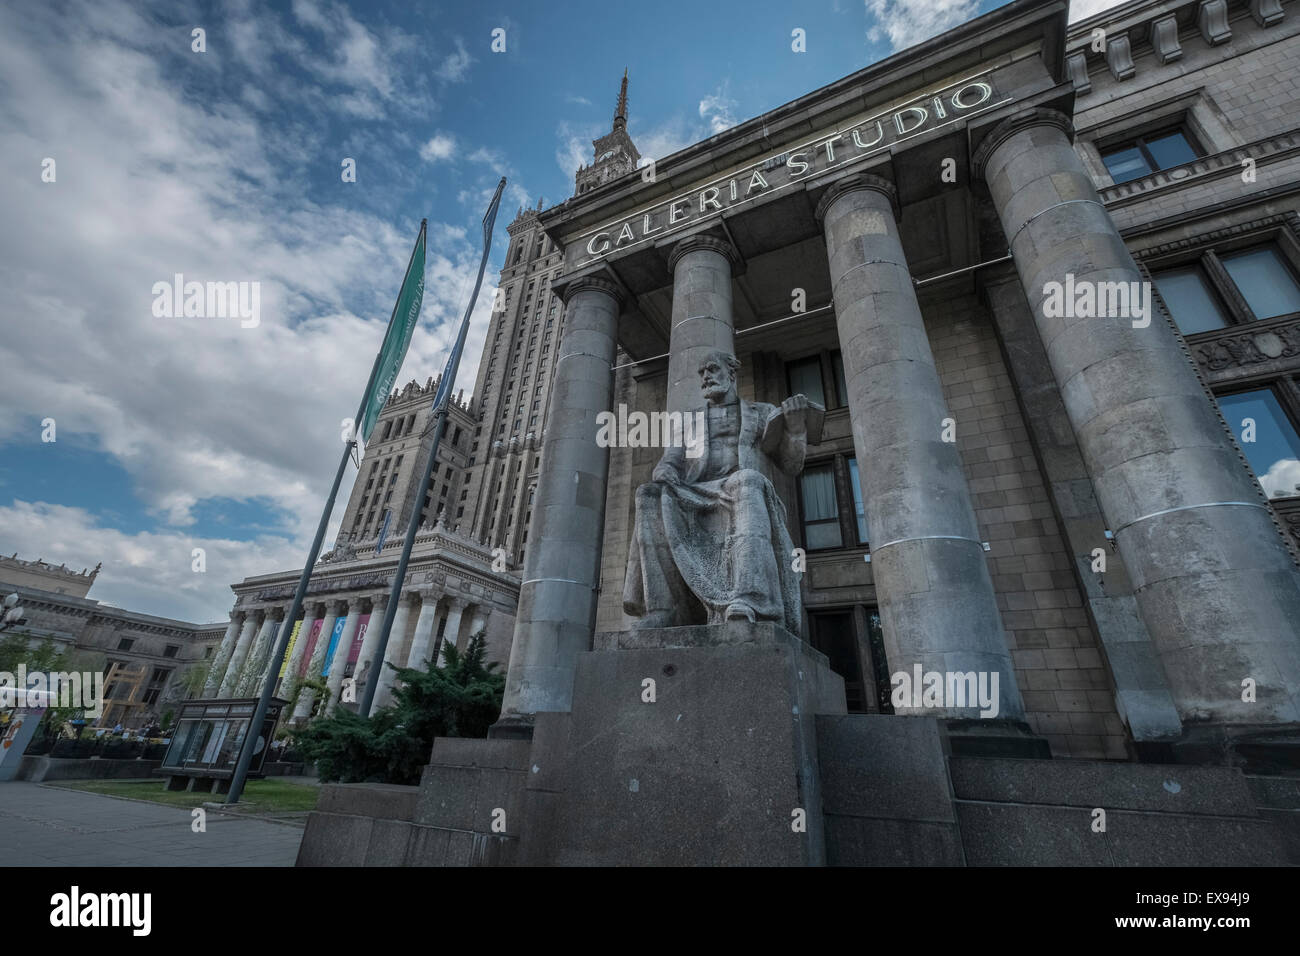 Palace of Culture and Science, Galeria Studio, Warsaw, Poland Stock Photo